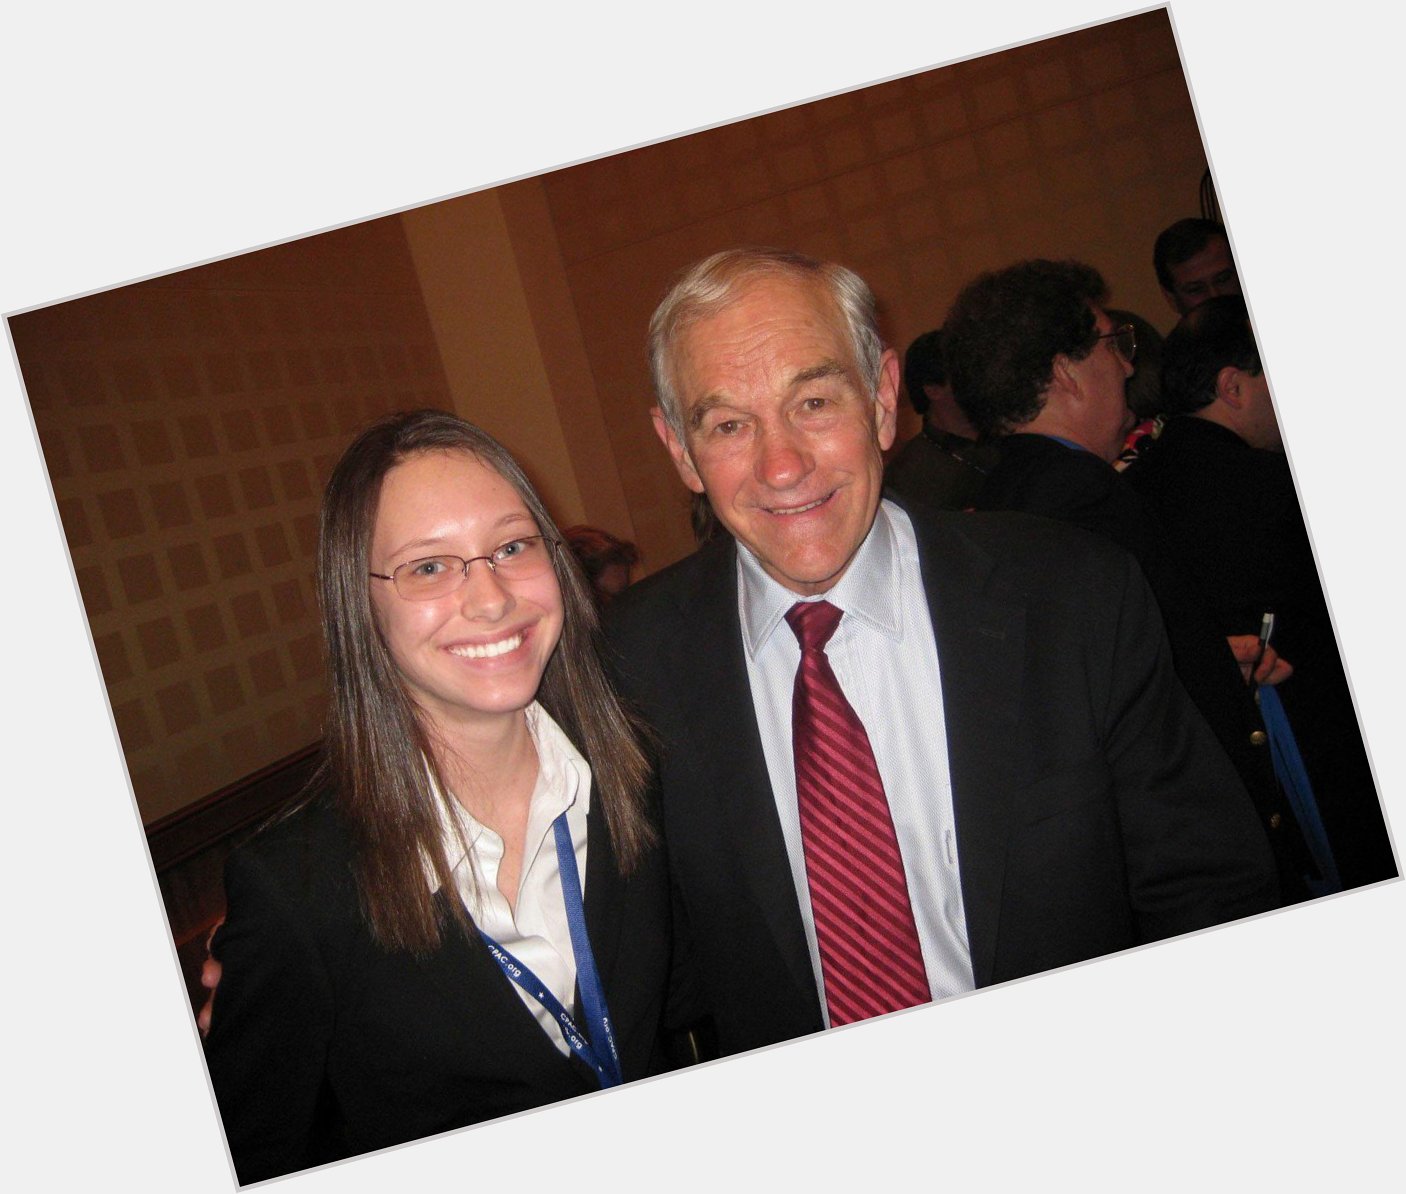 Without Ron Paul, I wouldn\t have met some of my best friends from college or my fiancé. Happy 80th birthday! 